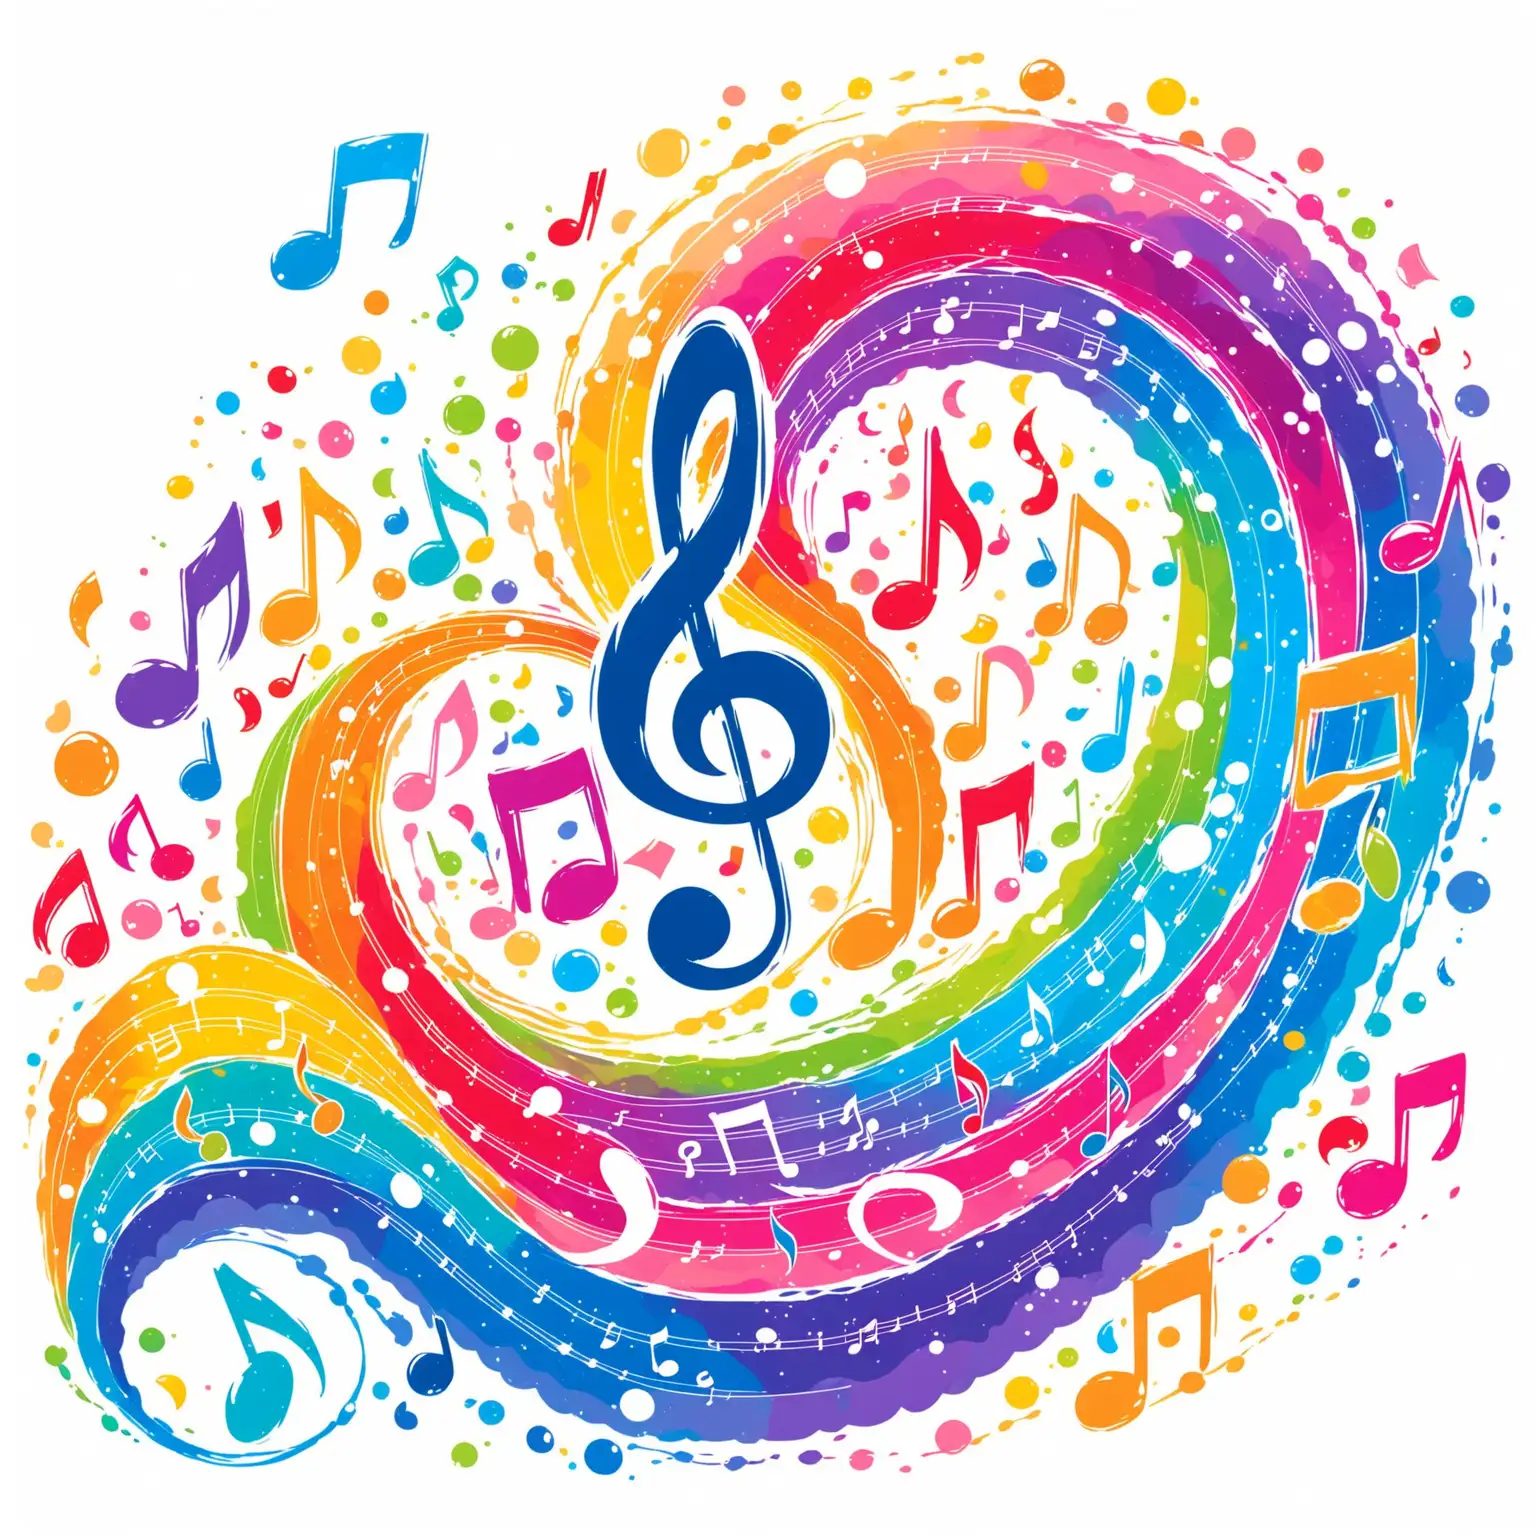 Vibrant Cartoon Music Stave with Bass Clef and Colorful Notes on White Background